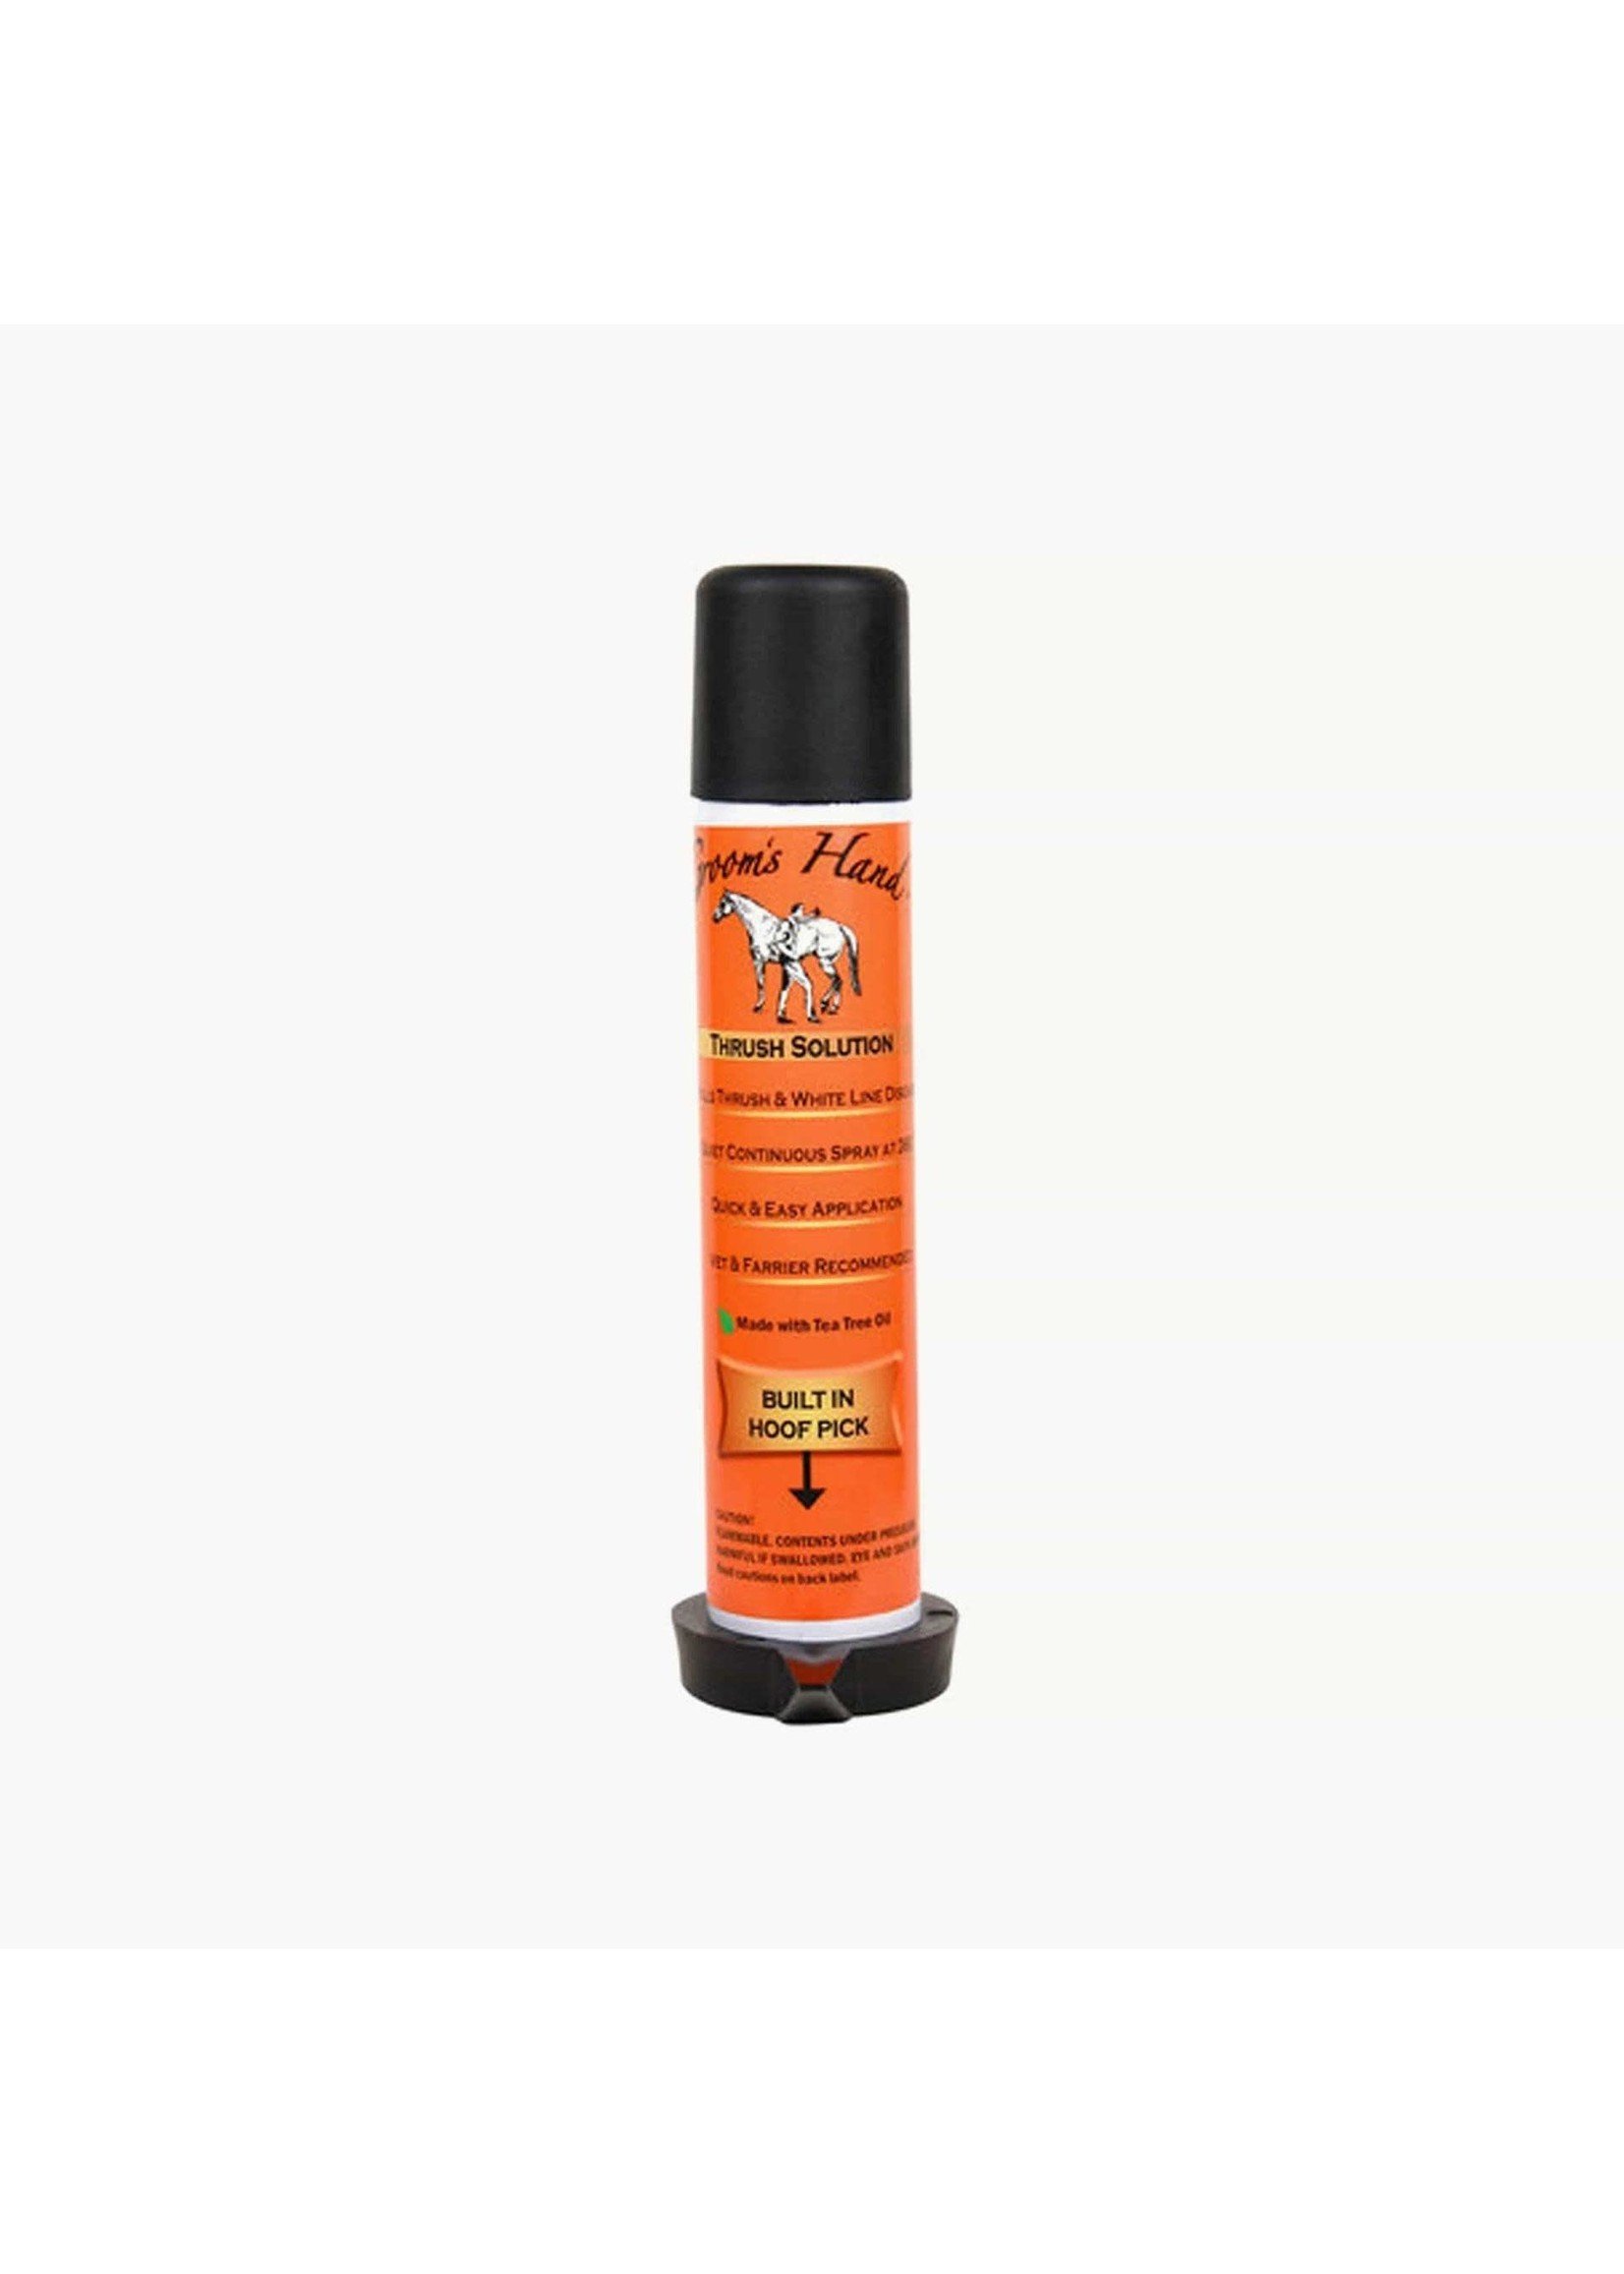 Grooms Hand Grooms Hand Thrush Solution